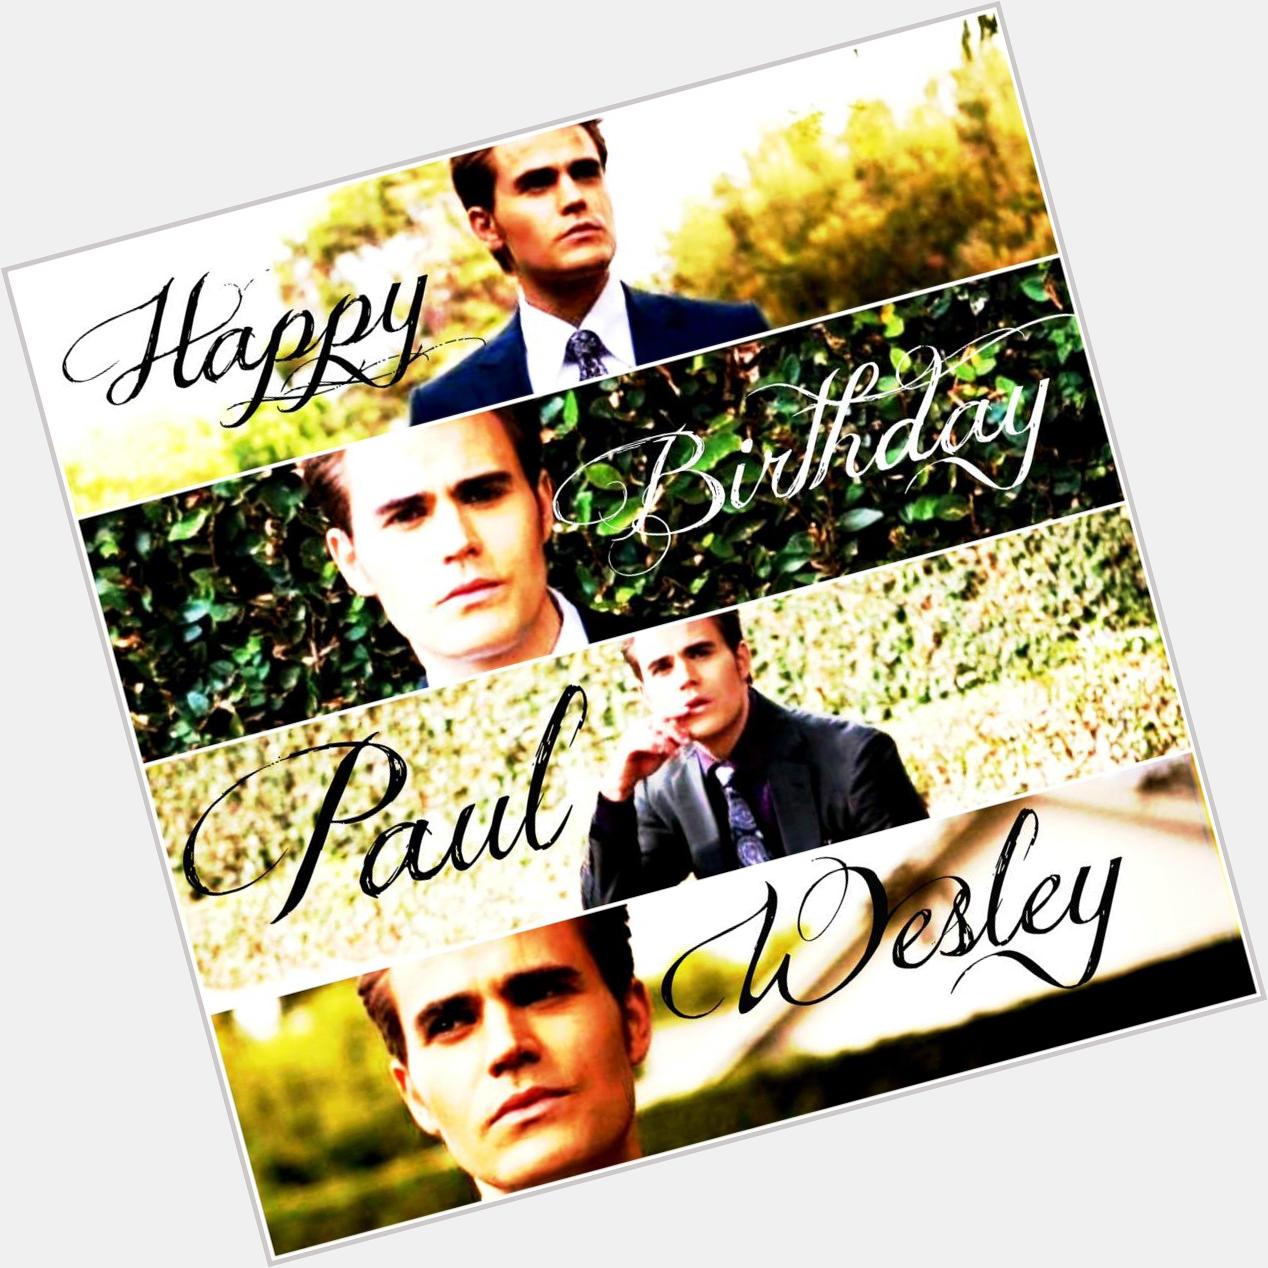 Happy birthday to the one and only Paul Wesley!!!    